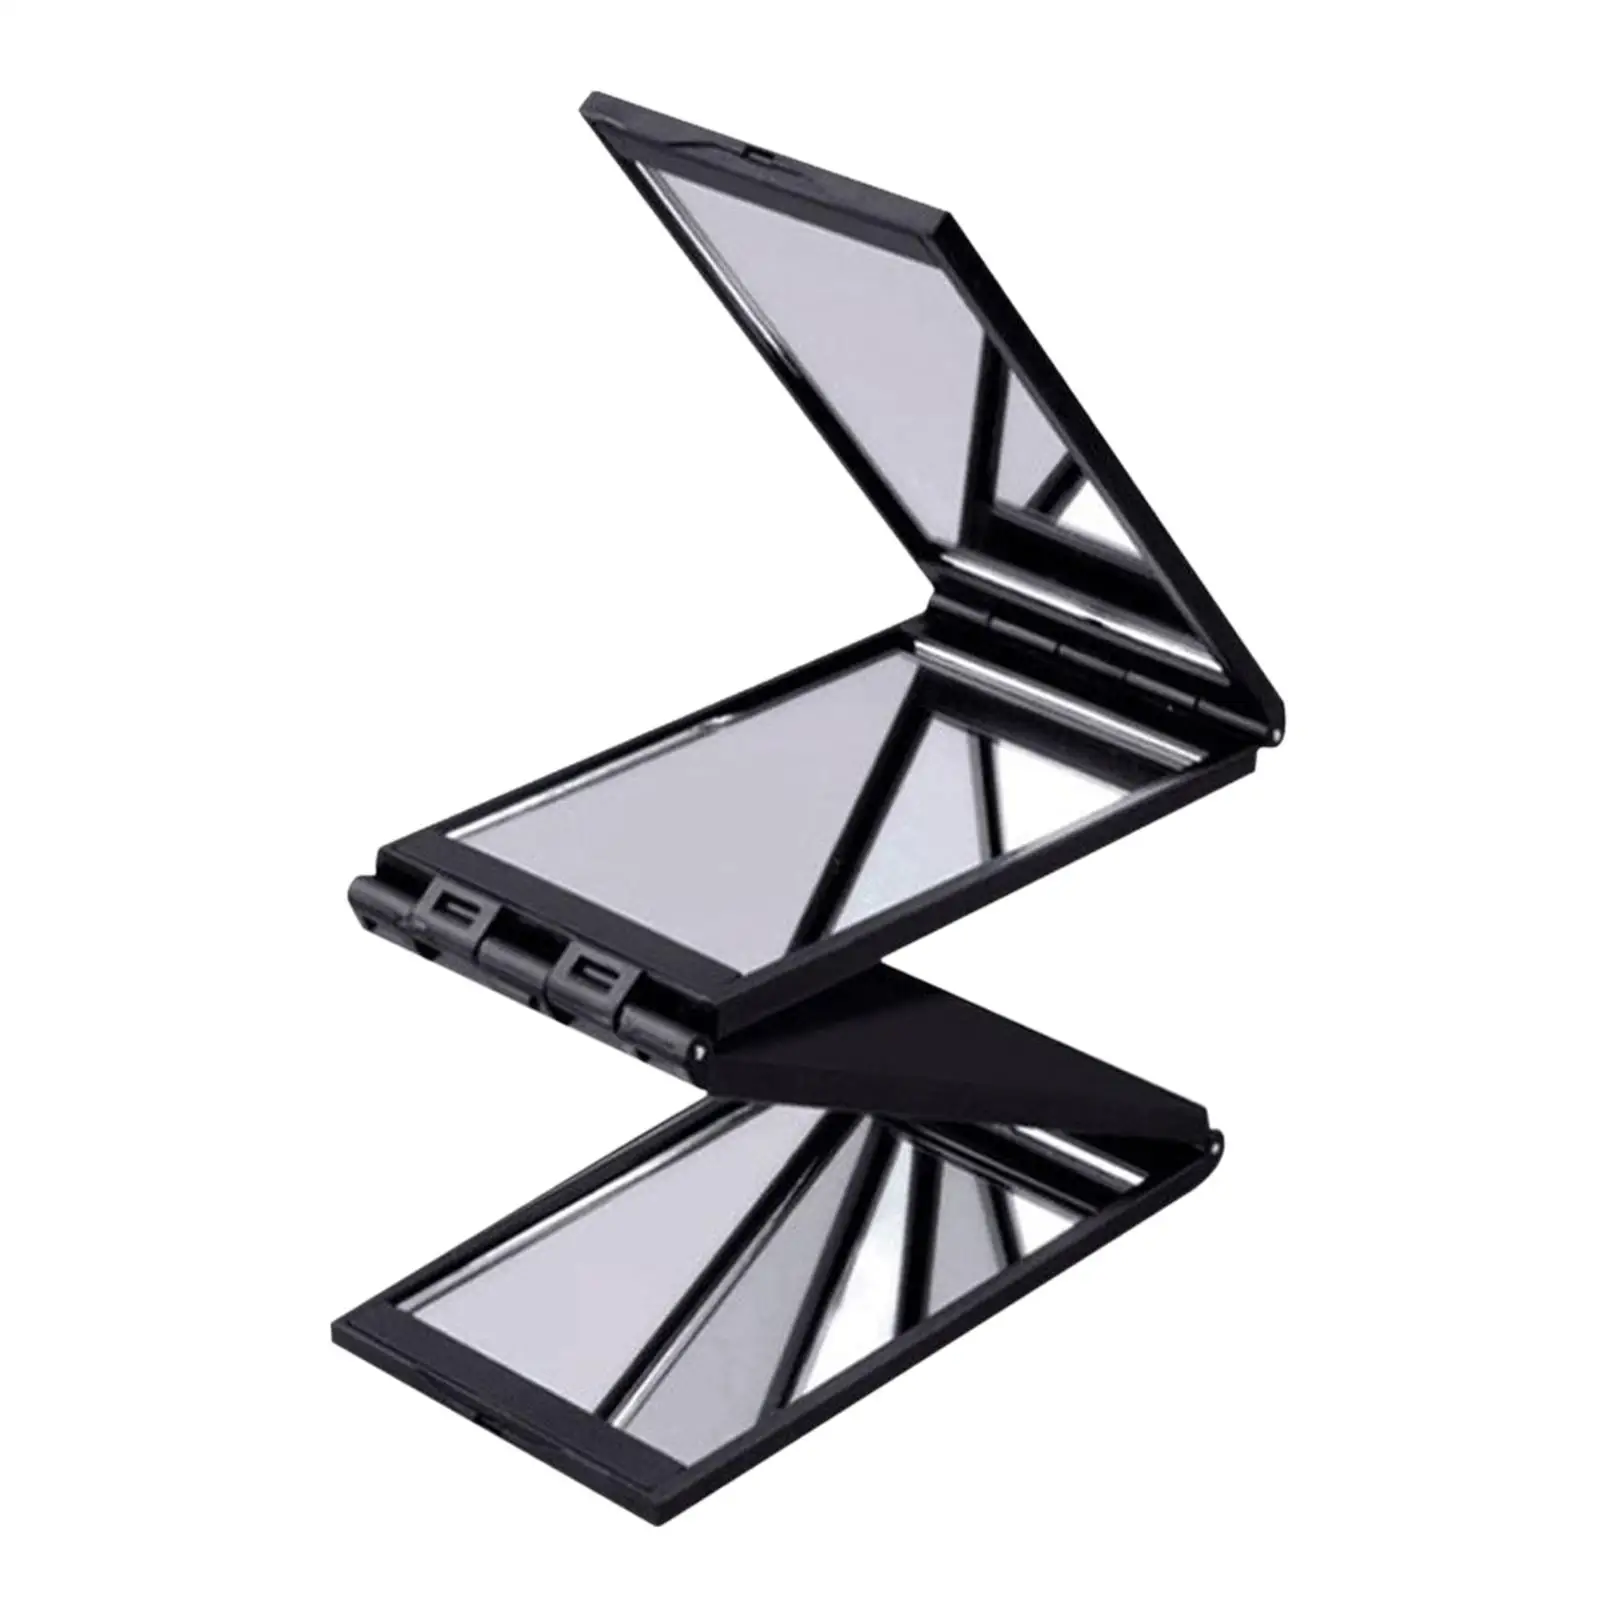 4 Sided Foldable Makeup Mirror Compact Mirror for Hair Styling Dorm SPA